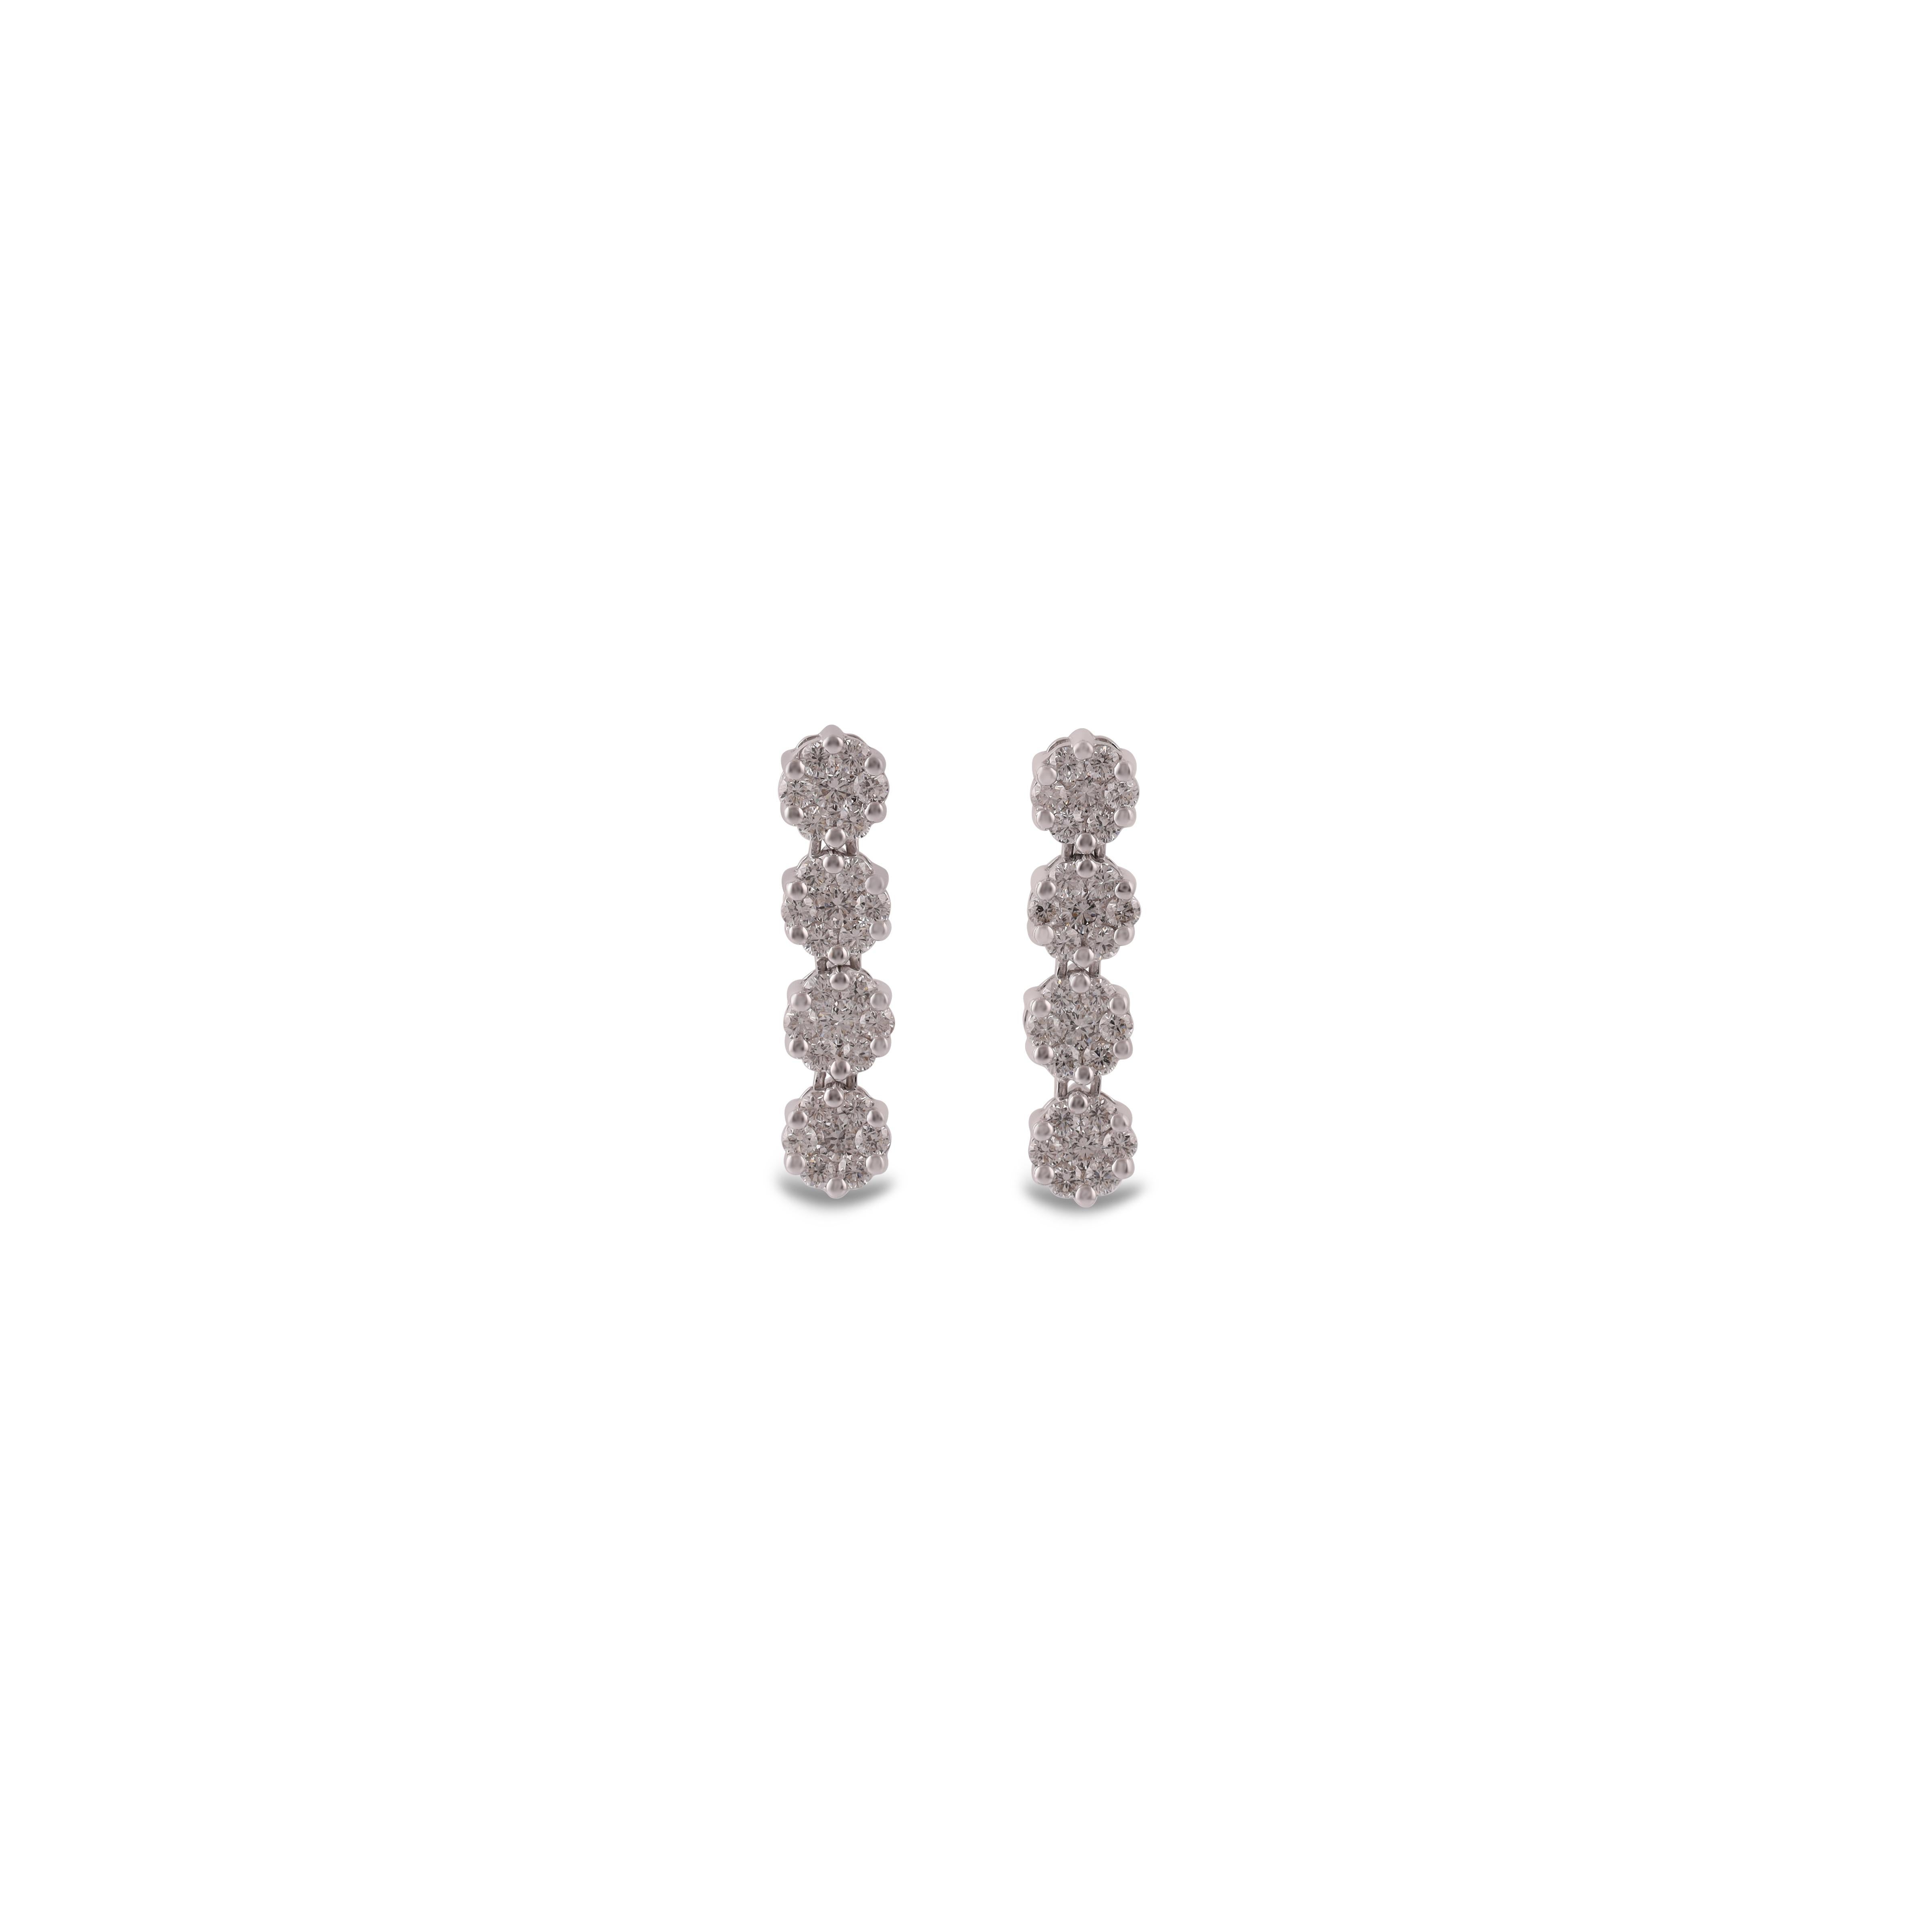 These are an exclusive earrings wit diamonds features  of  56 pieces of round  of diamonds weight 0.72 carats, These entire earrings are studded in 18k White gold, earrings have a simple pull & push mechanism. 